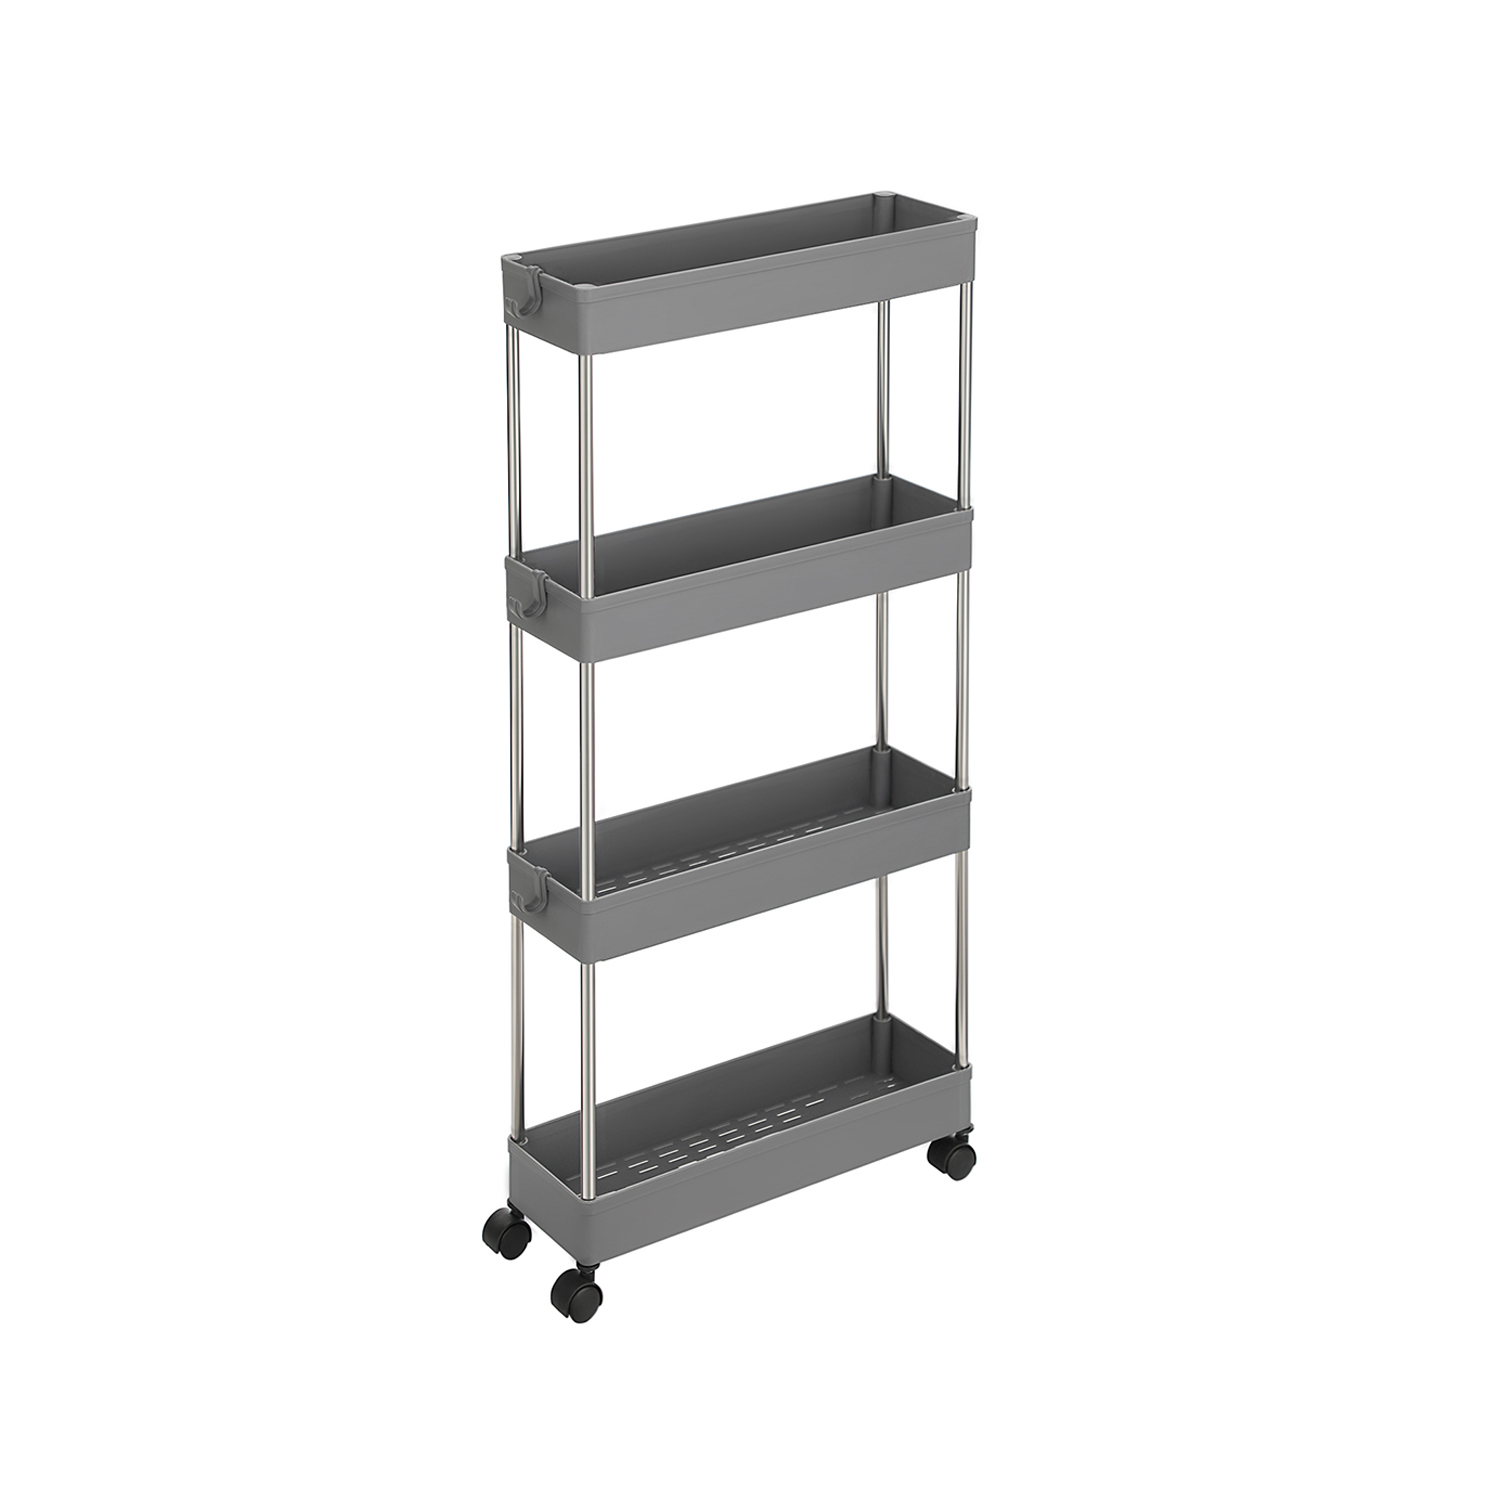 White LGR204W01 4-Tier Slide-Out Trolley Rolling Storage Rack on Wheels Tight Spaces Laundry Room Kitchen SONGMICS Slim Storage Cart 40 x 15 x 80 cm for Small 